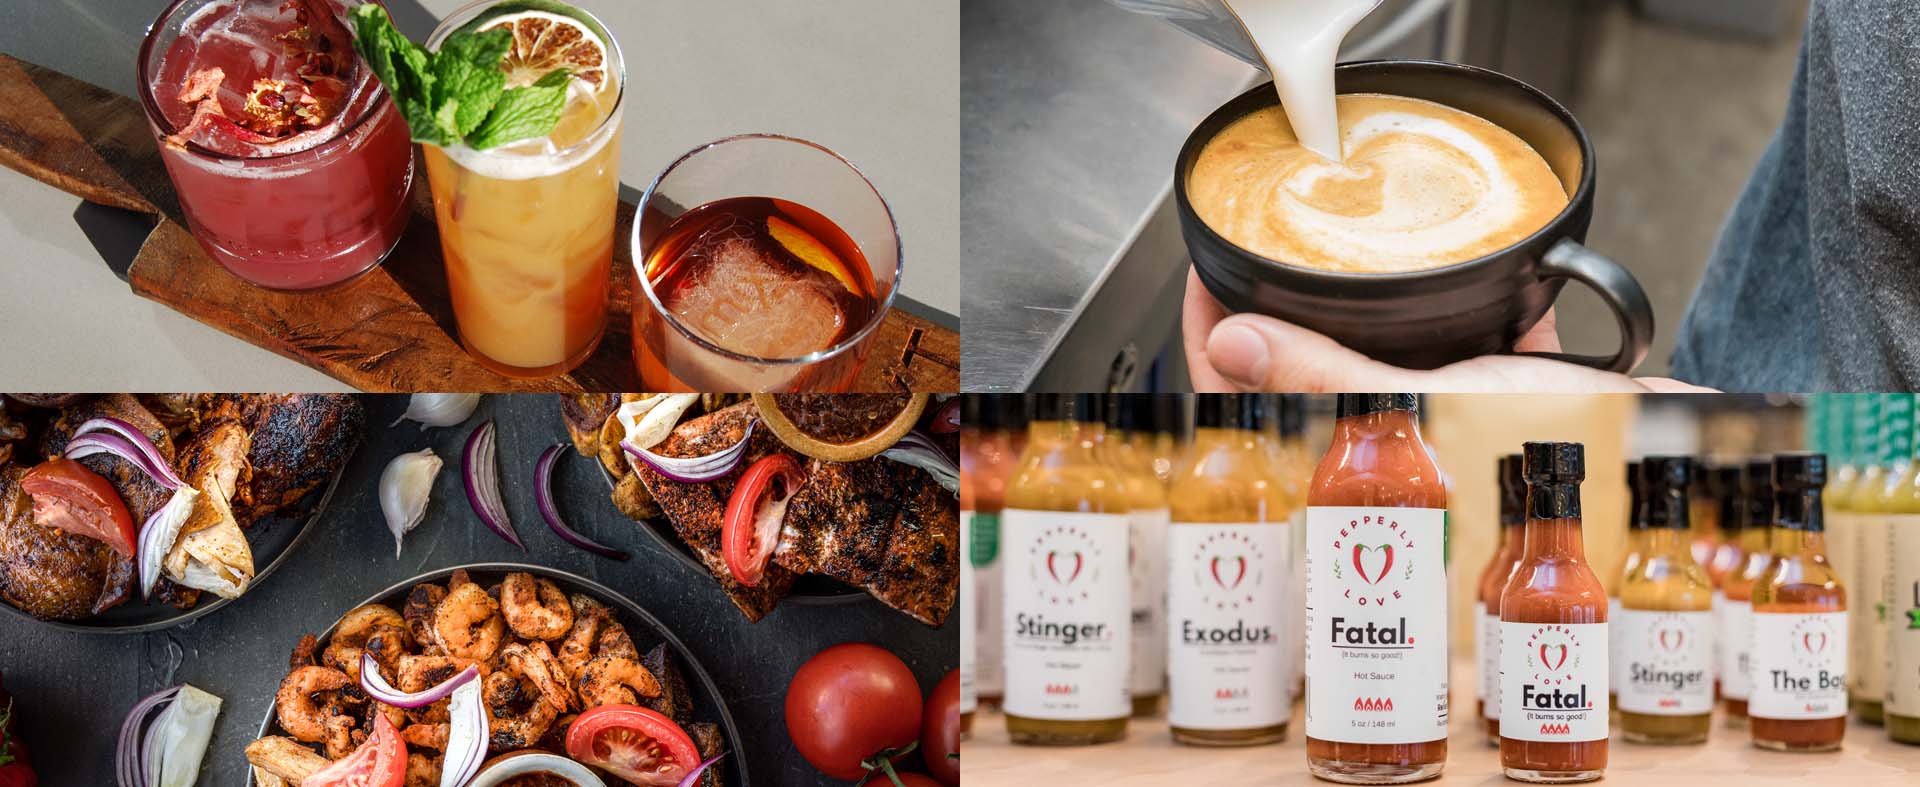 A collage of food and beverages at miXt Food Hall